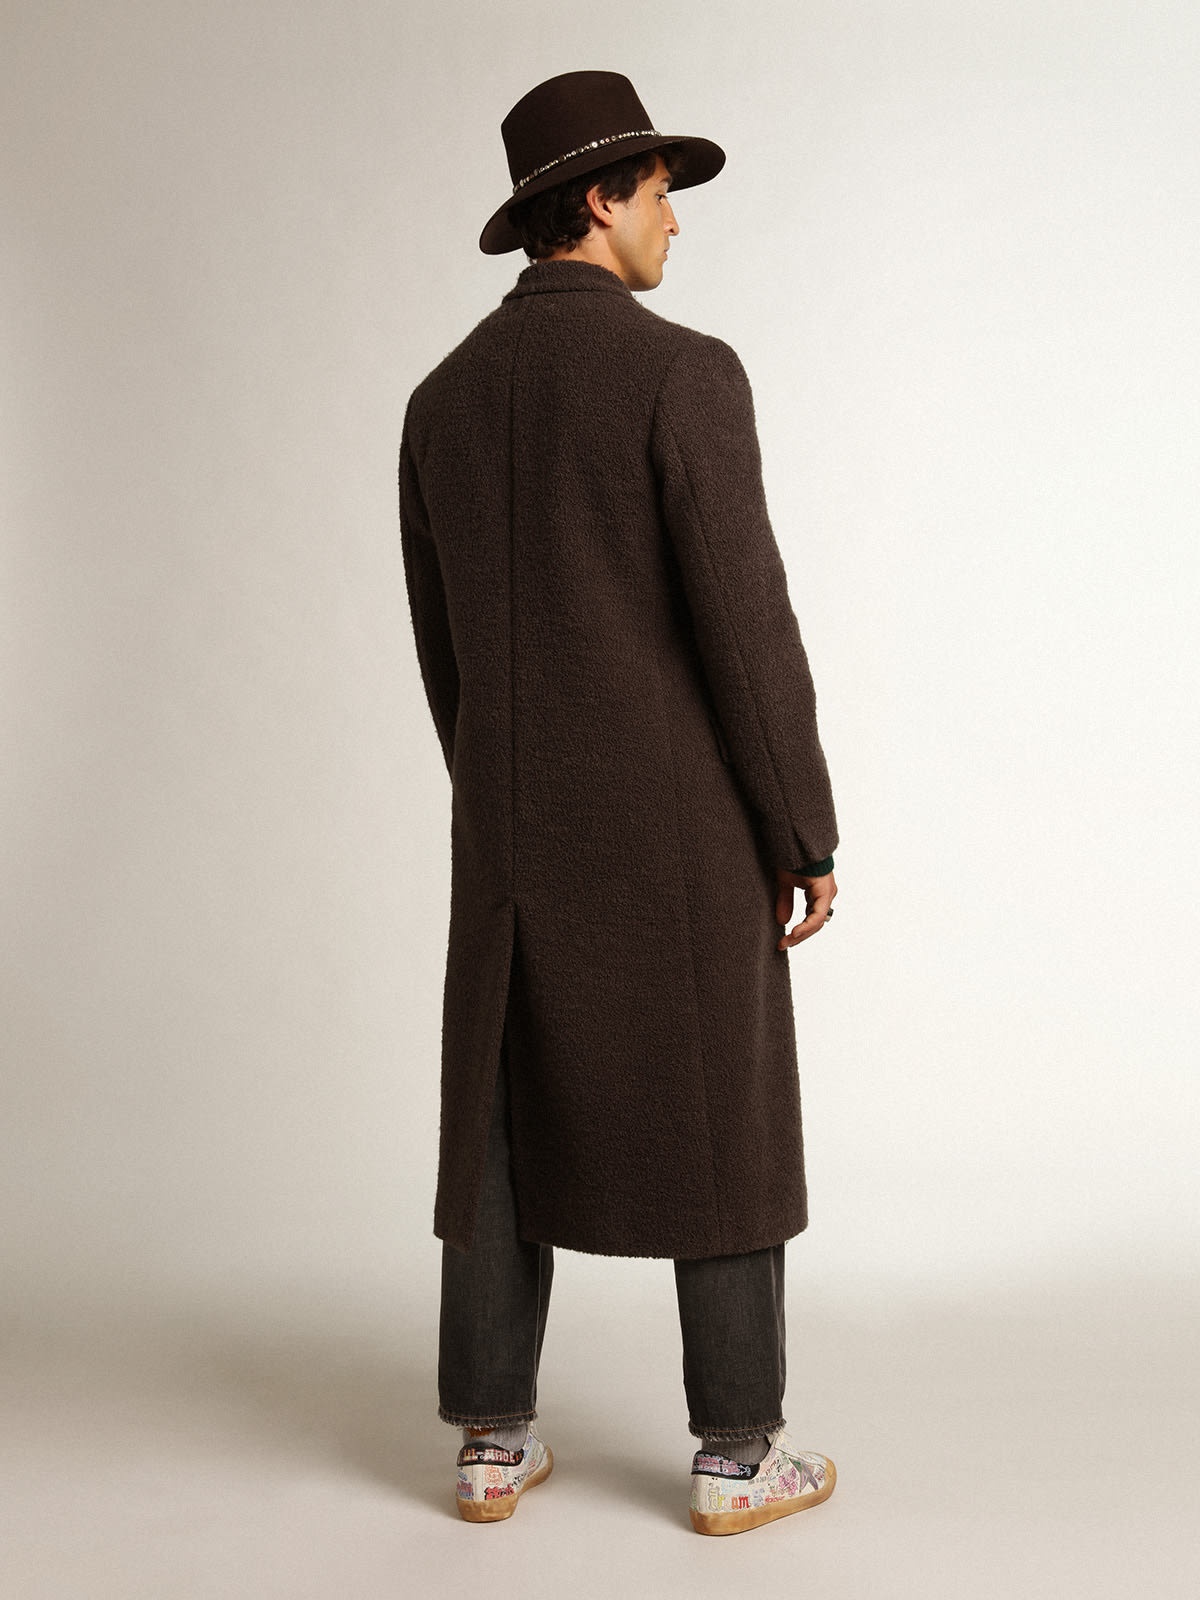 Men's double-breasted coat in licorice-colored bouclé wool - 4